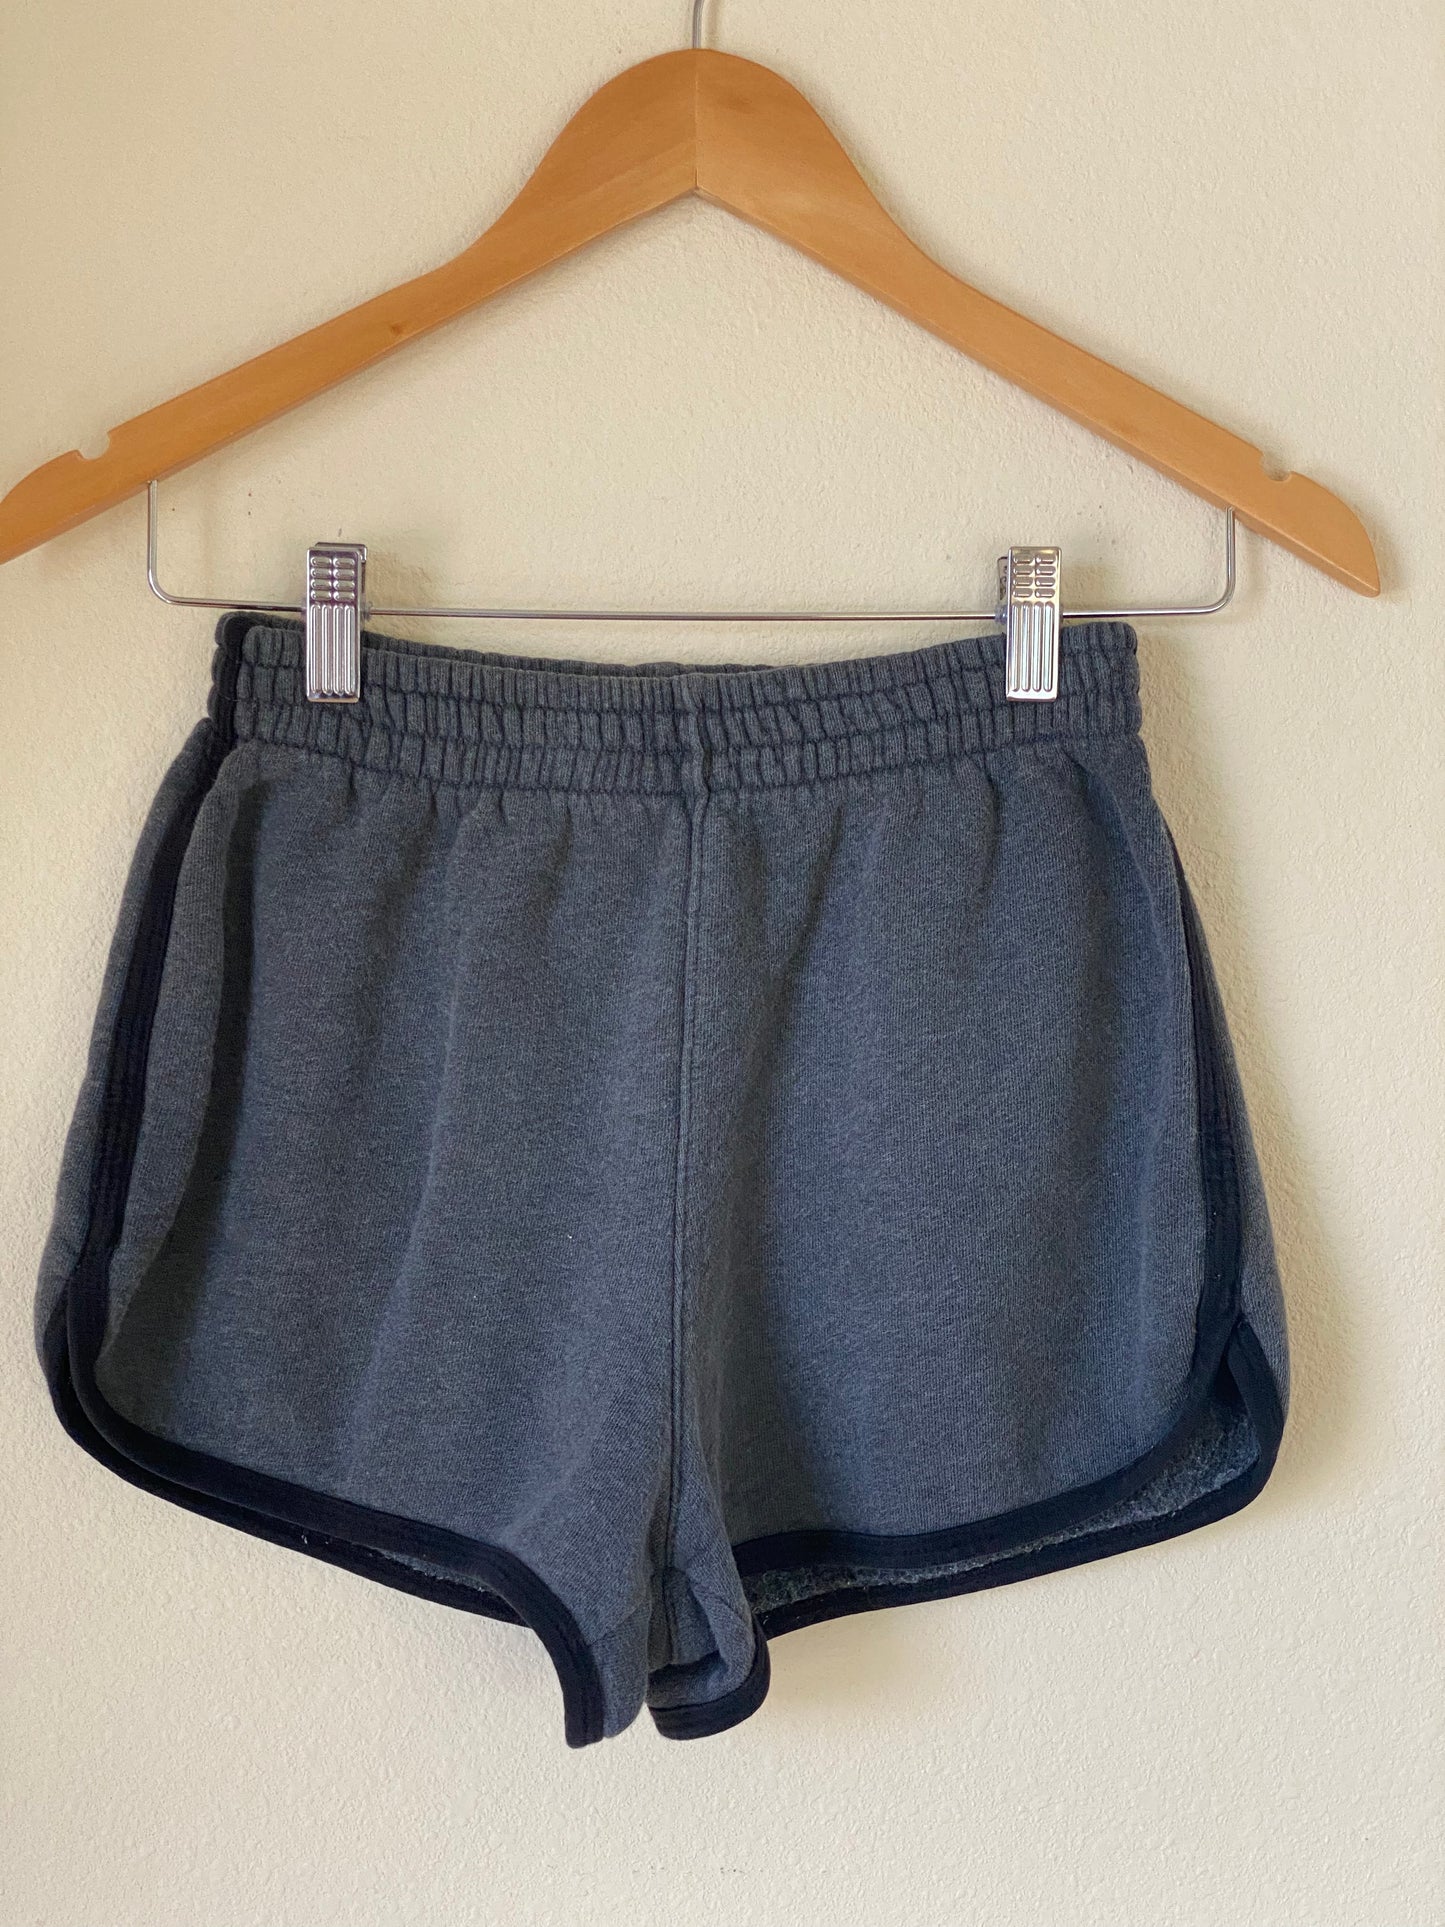 Brandy Melville Grey Booty Shorts SIZE XSMALL/SMALL